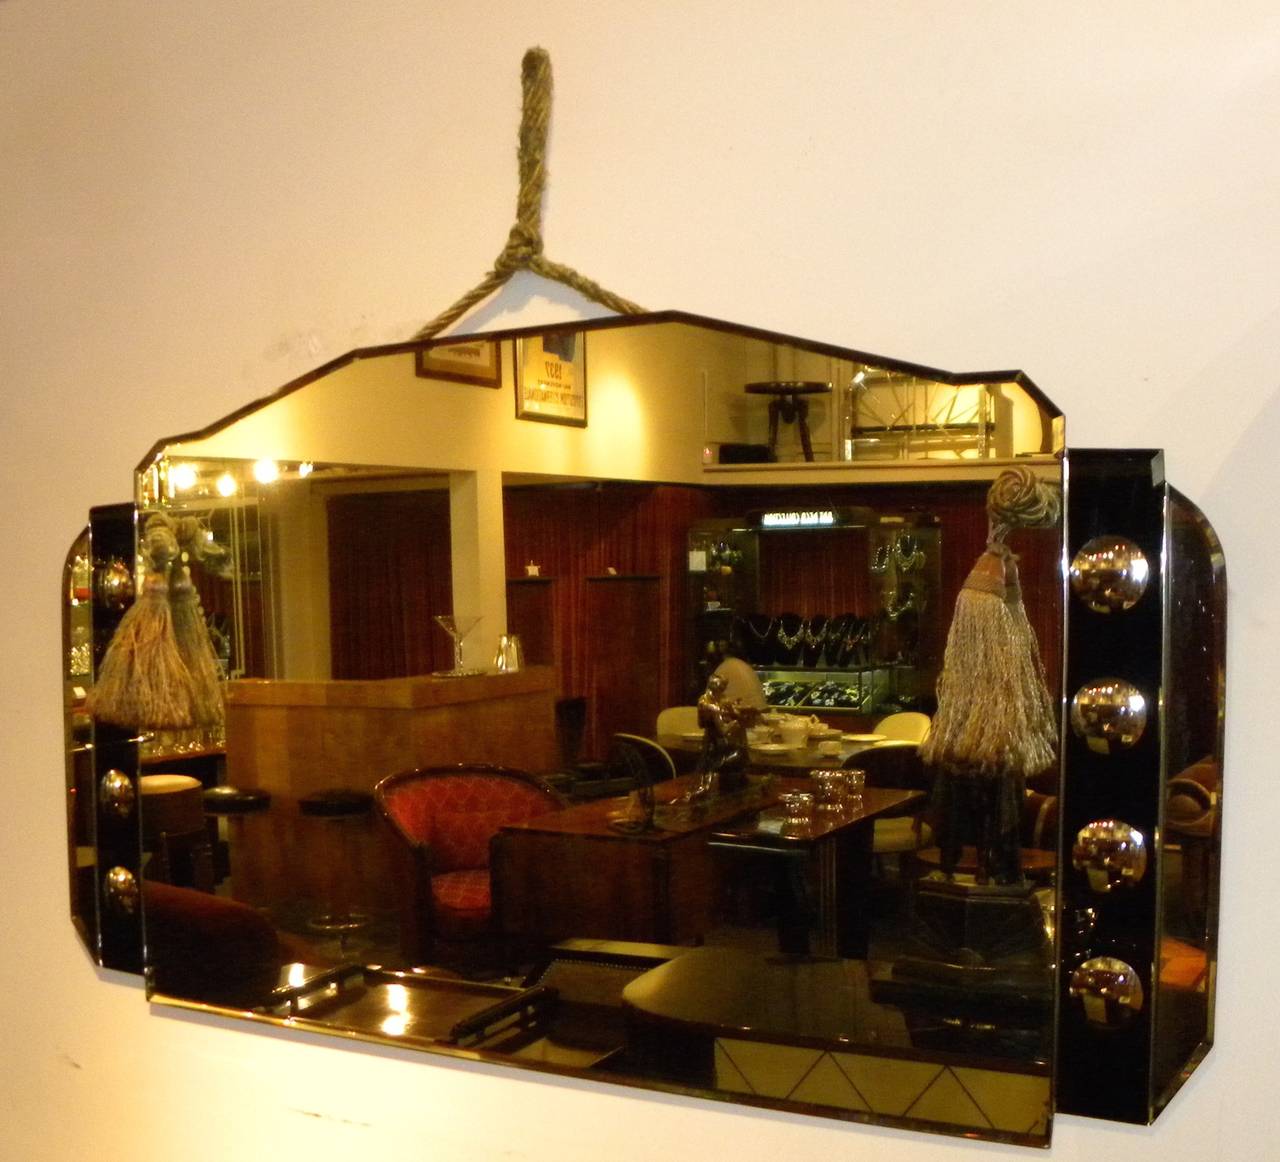 Beautiful Art Deco mirror with beveled edges, cut-out edges, circle designs and black glass. Original piece with original hanging period tasseled rope. Very dynamic style, would look great in a bathroom above a console or small piece of furniture.